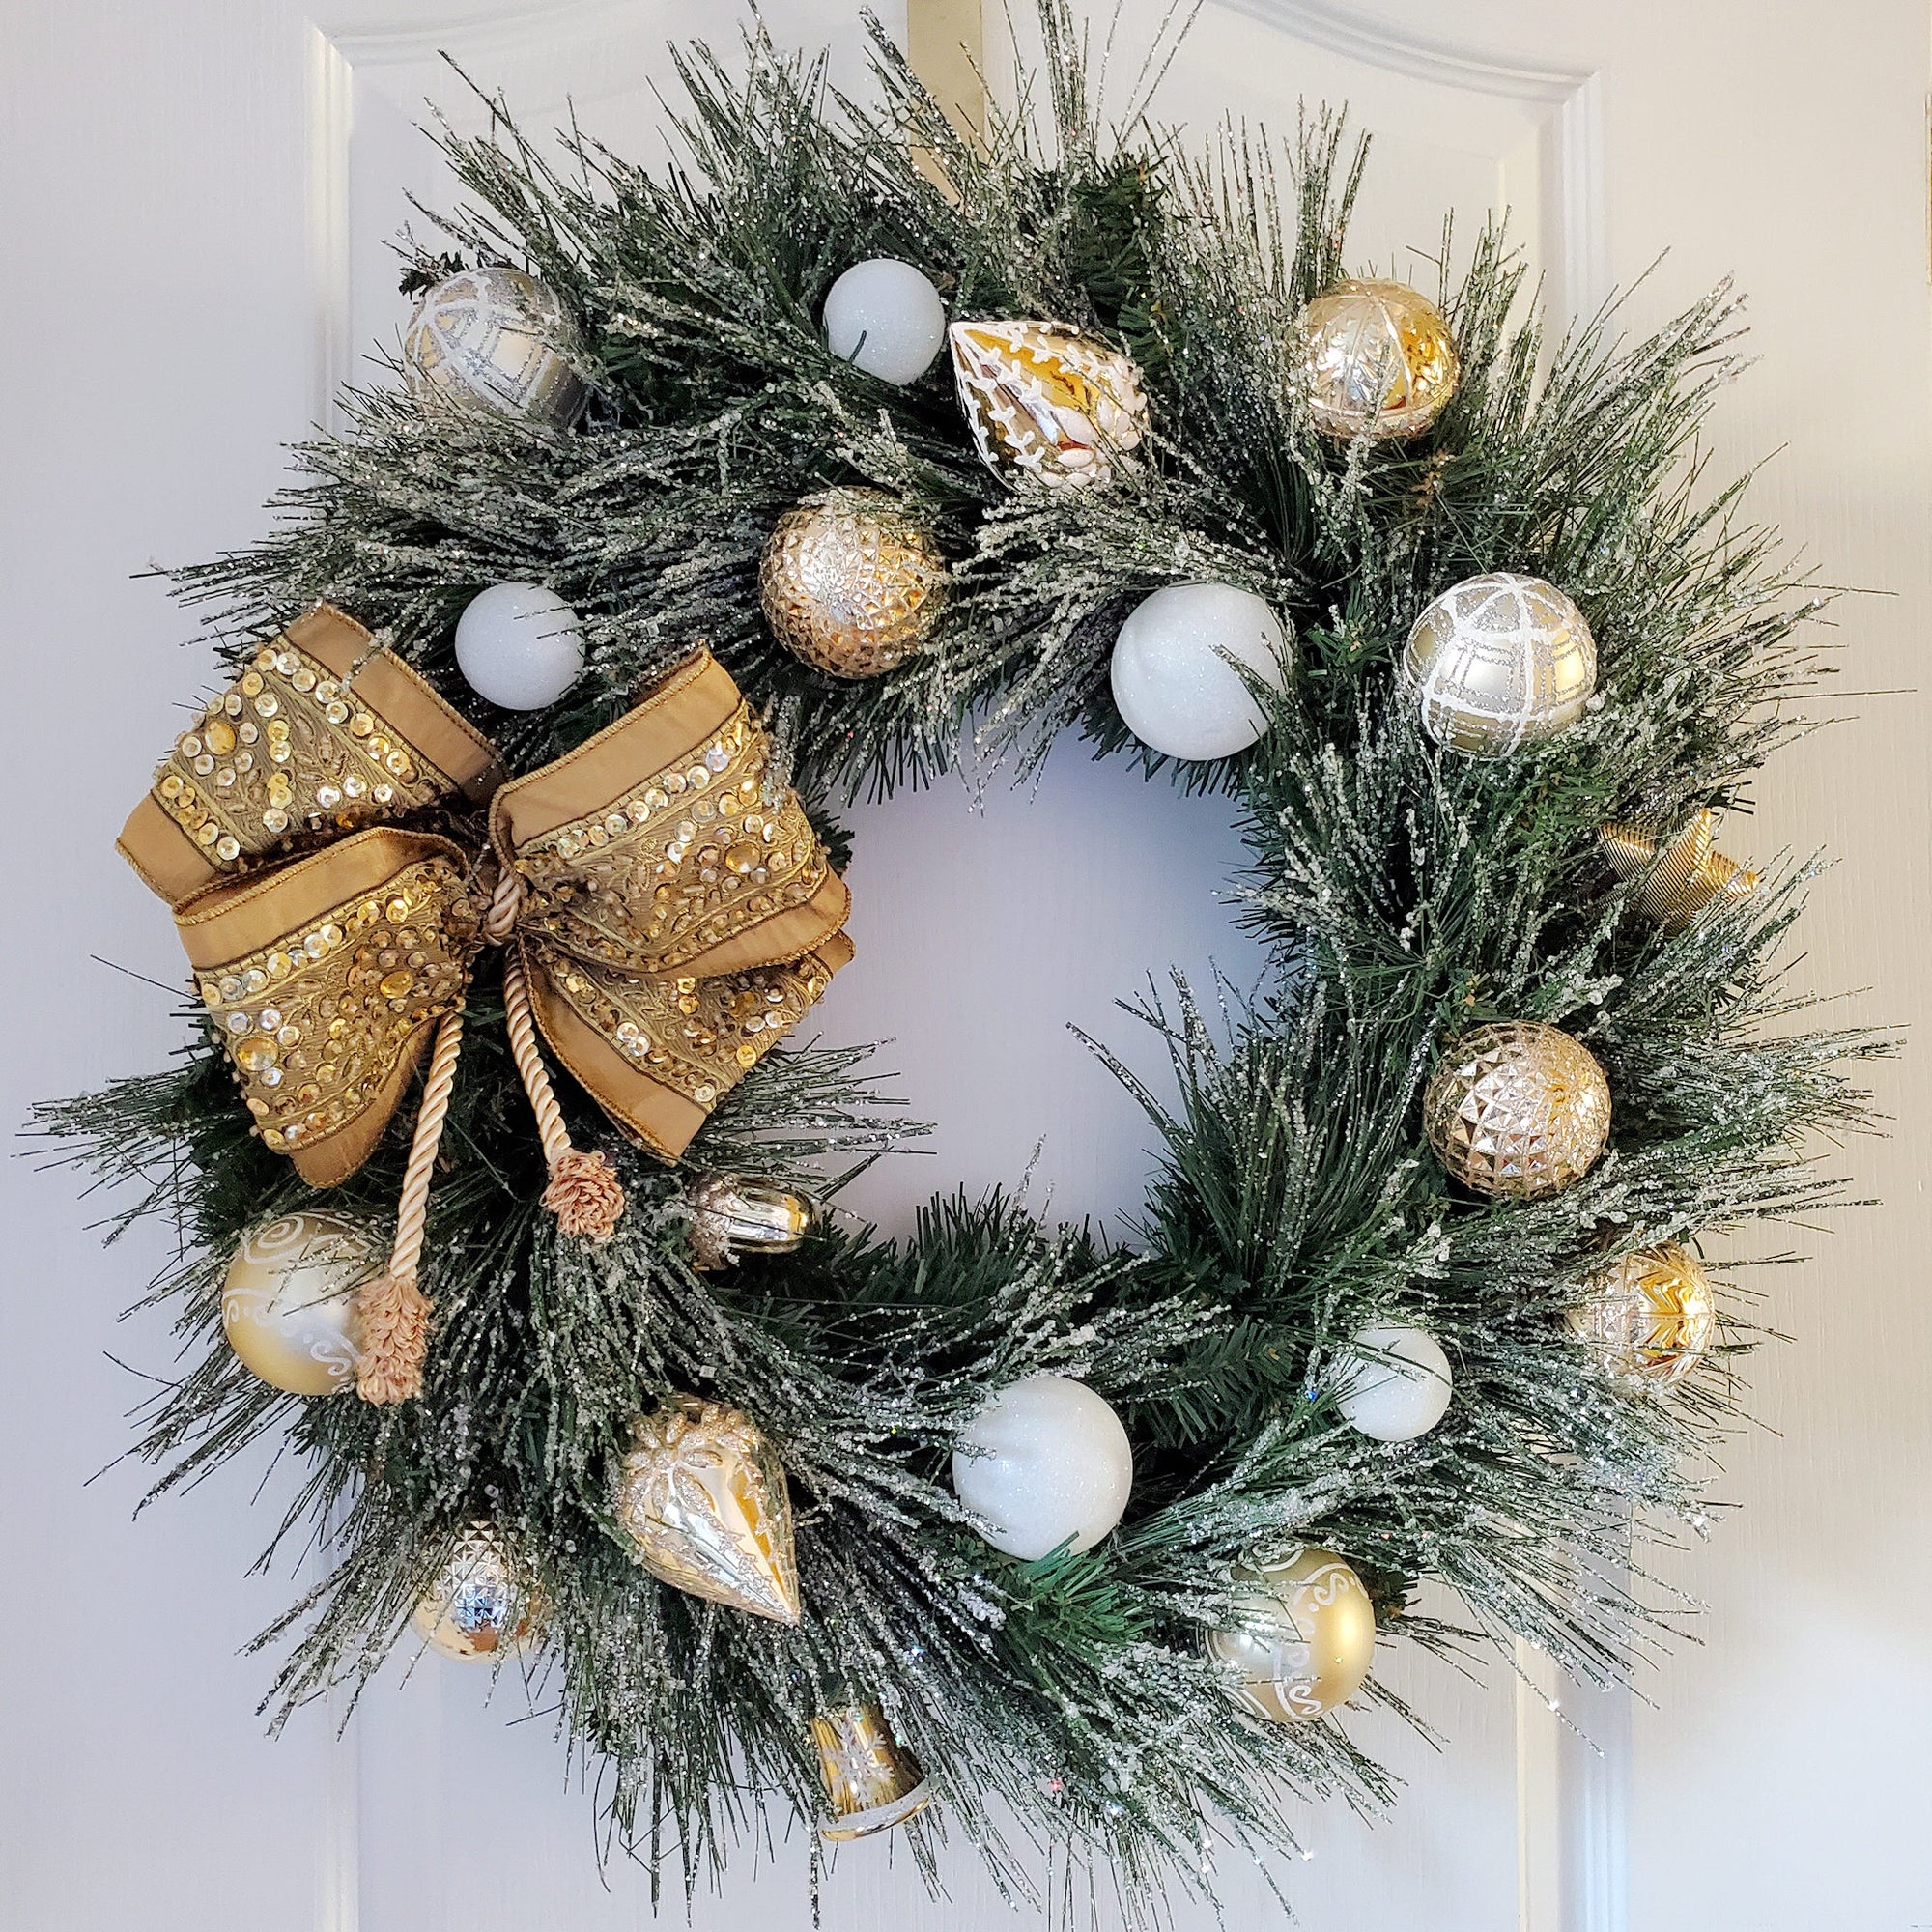 Iced Pine Branches Circle the Wreath. The wreath is decorated with a collection of gold and white sparkling ornaments.